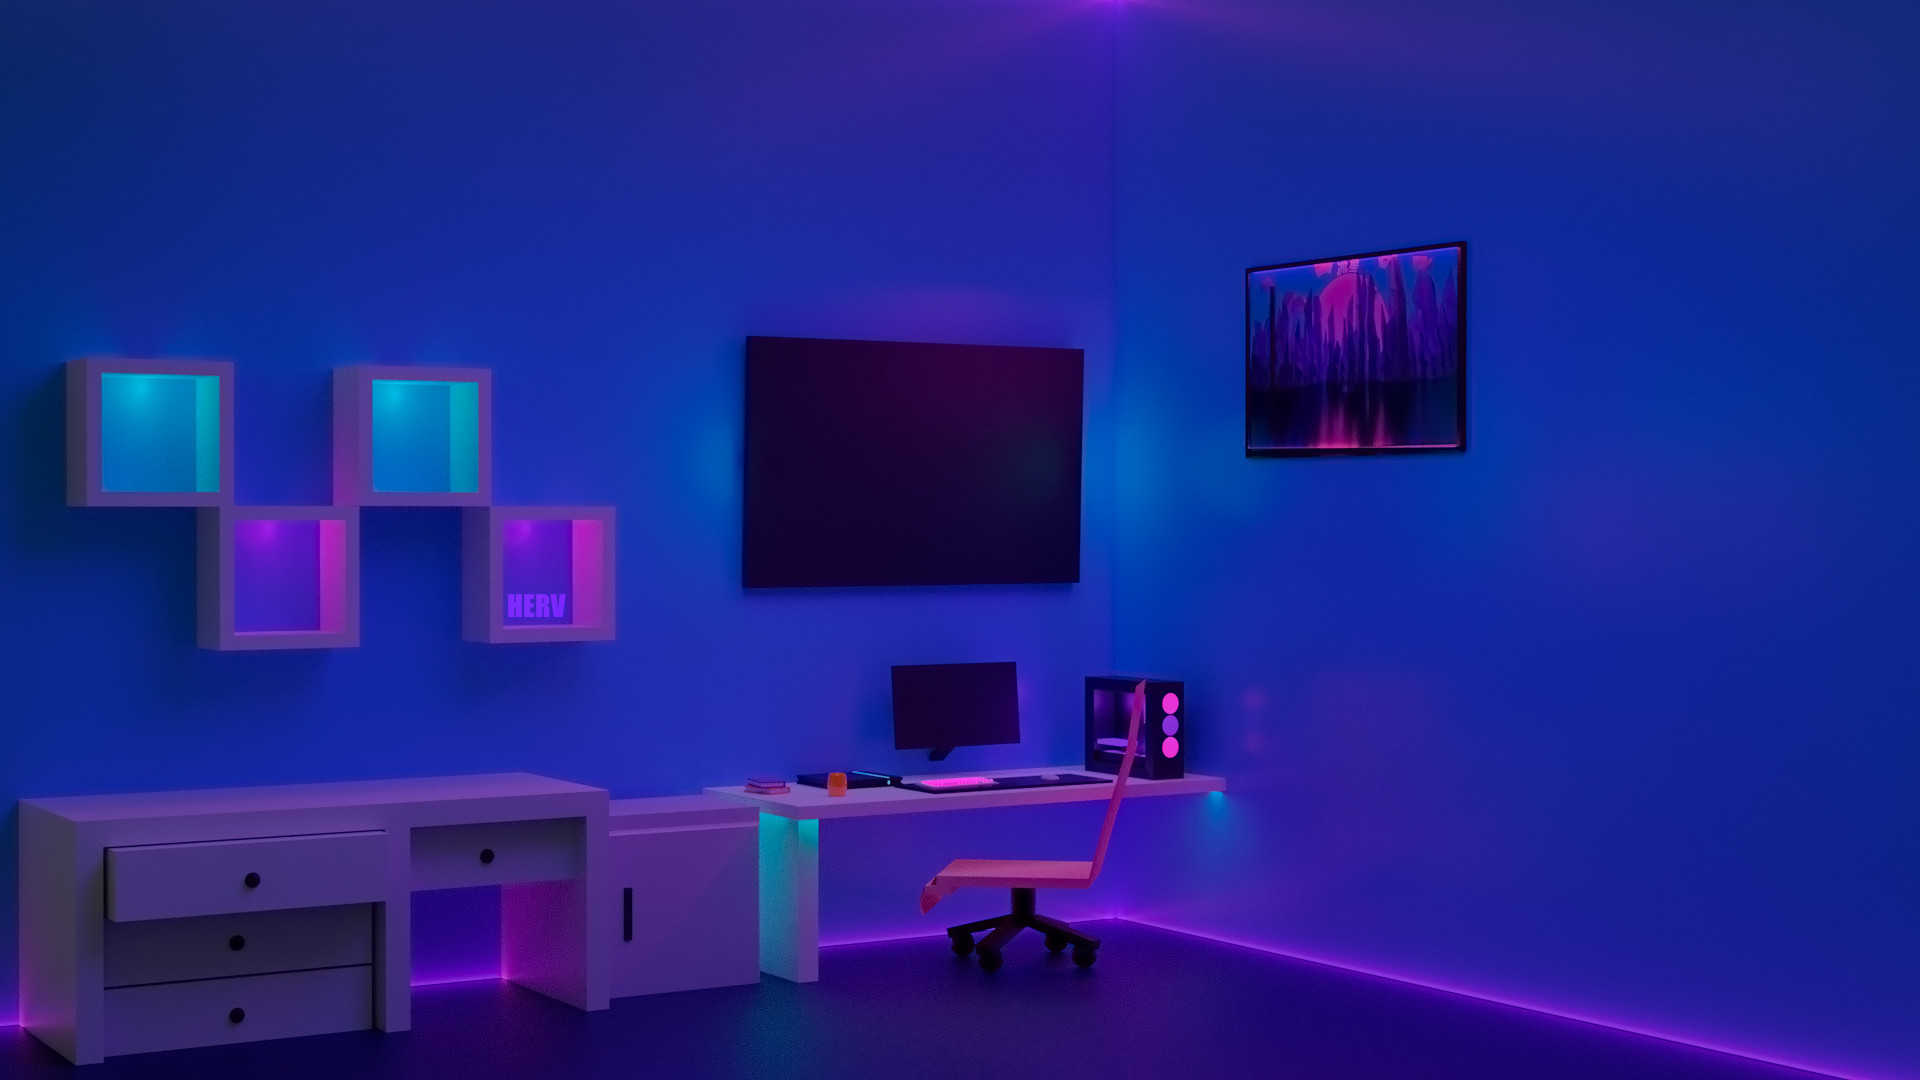 Gamer Room in Low Poly by imherv on DeviantArt